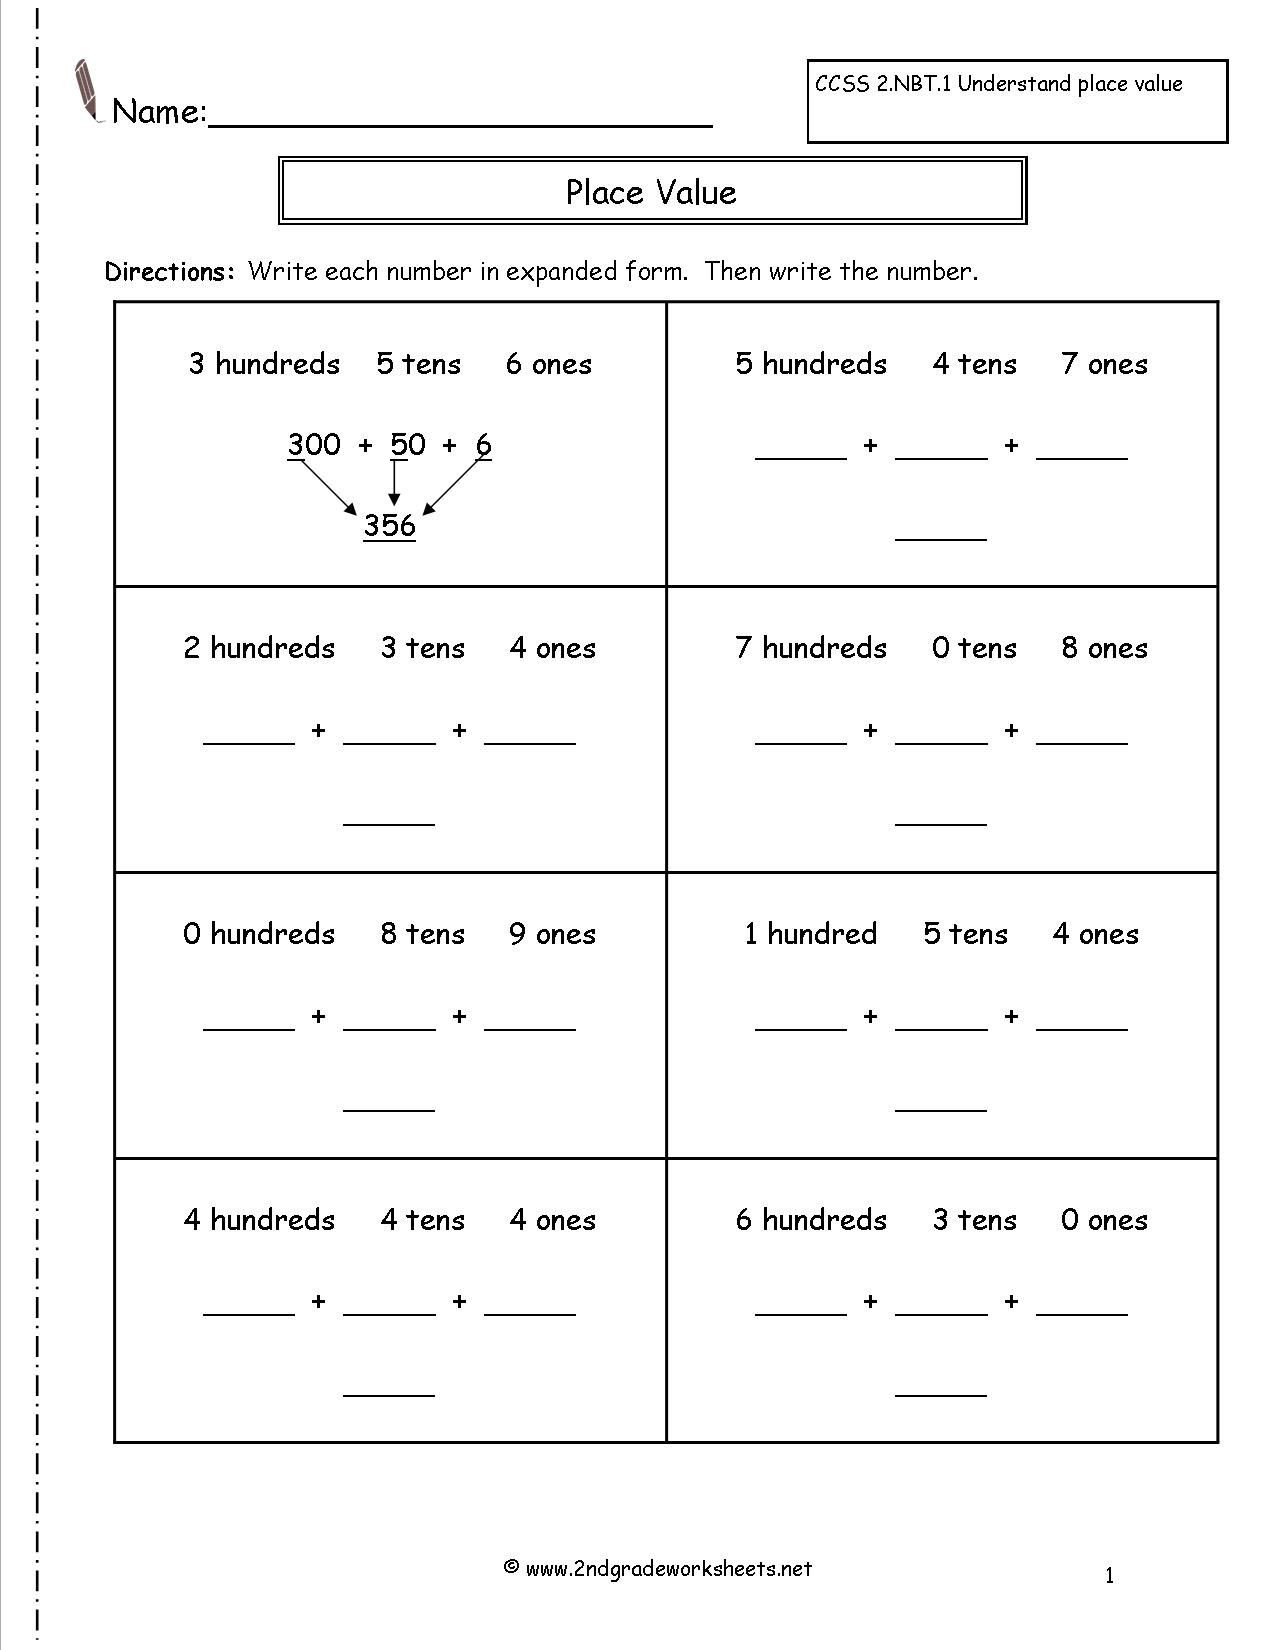 reading and writing numbers to 1000 worksheets of number 3 worksheet